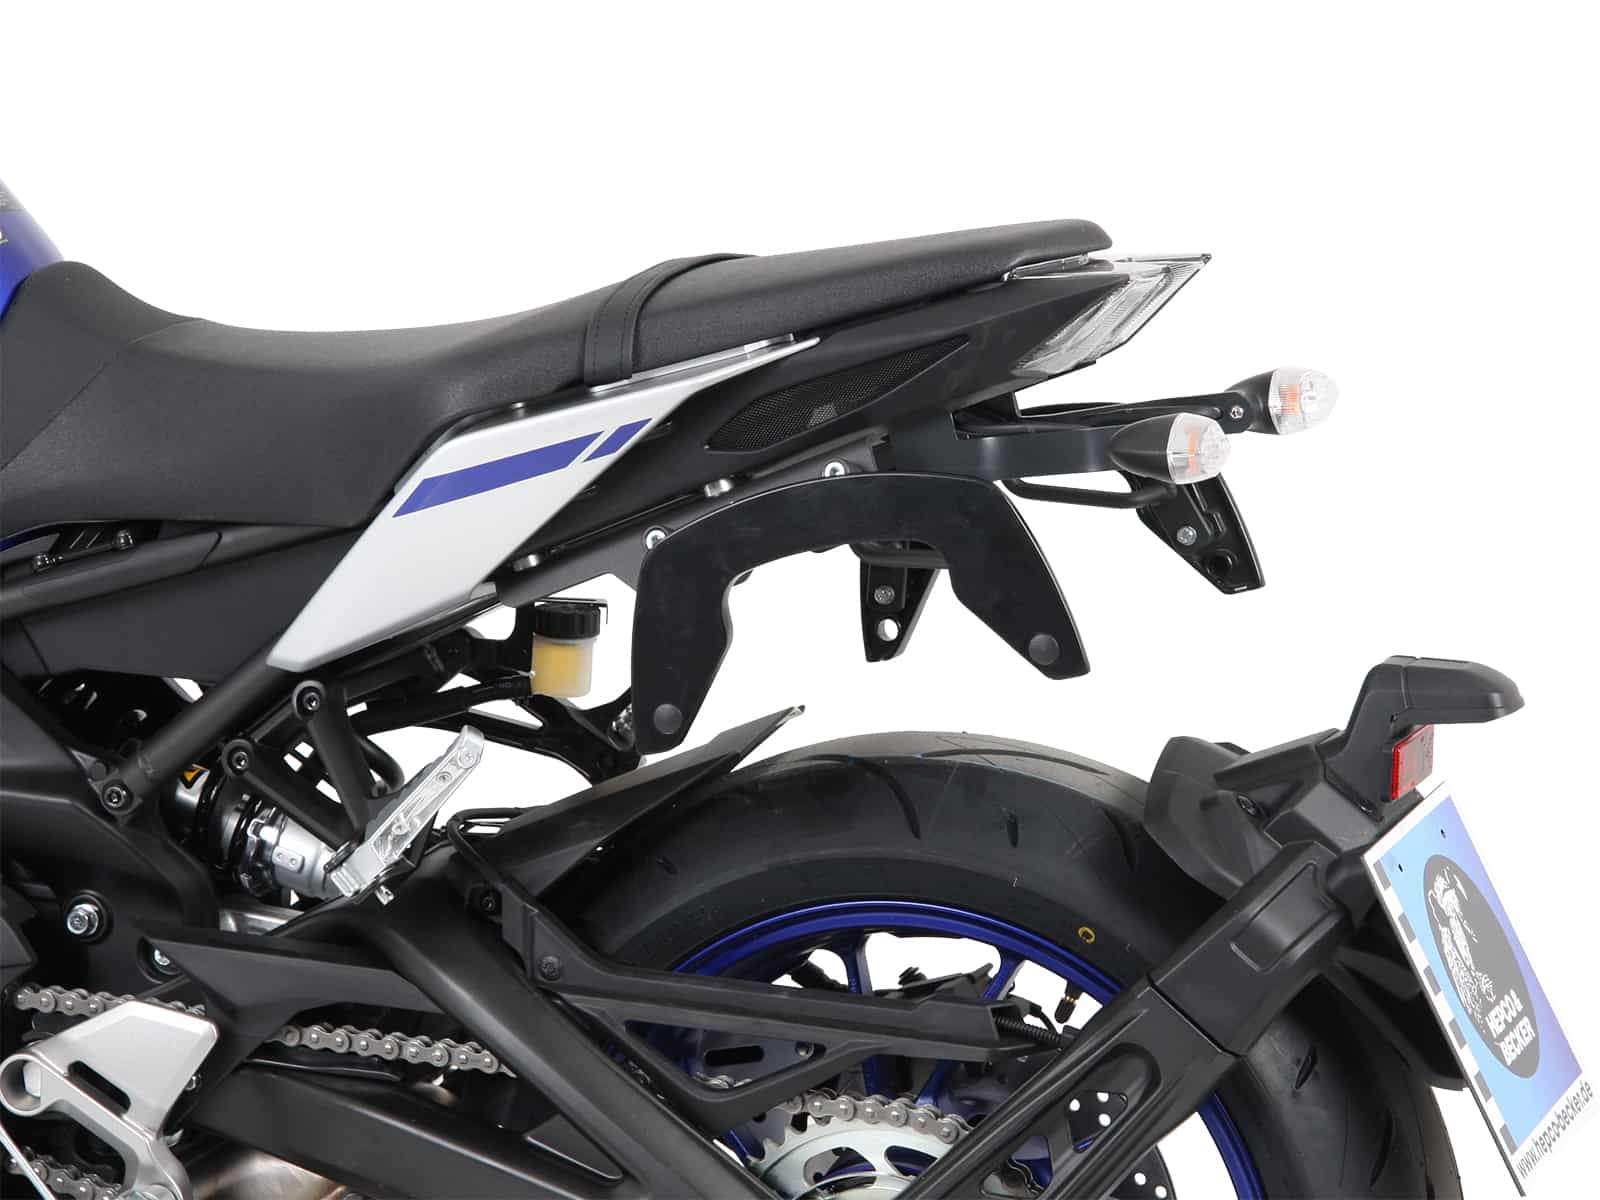 C-Bow sidecarrier for Yamaha MT-09 SP (2018-2020)